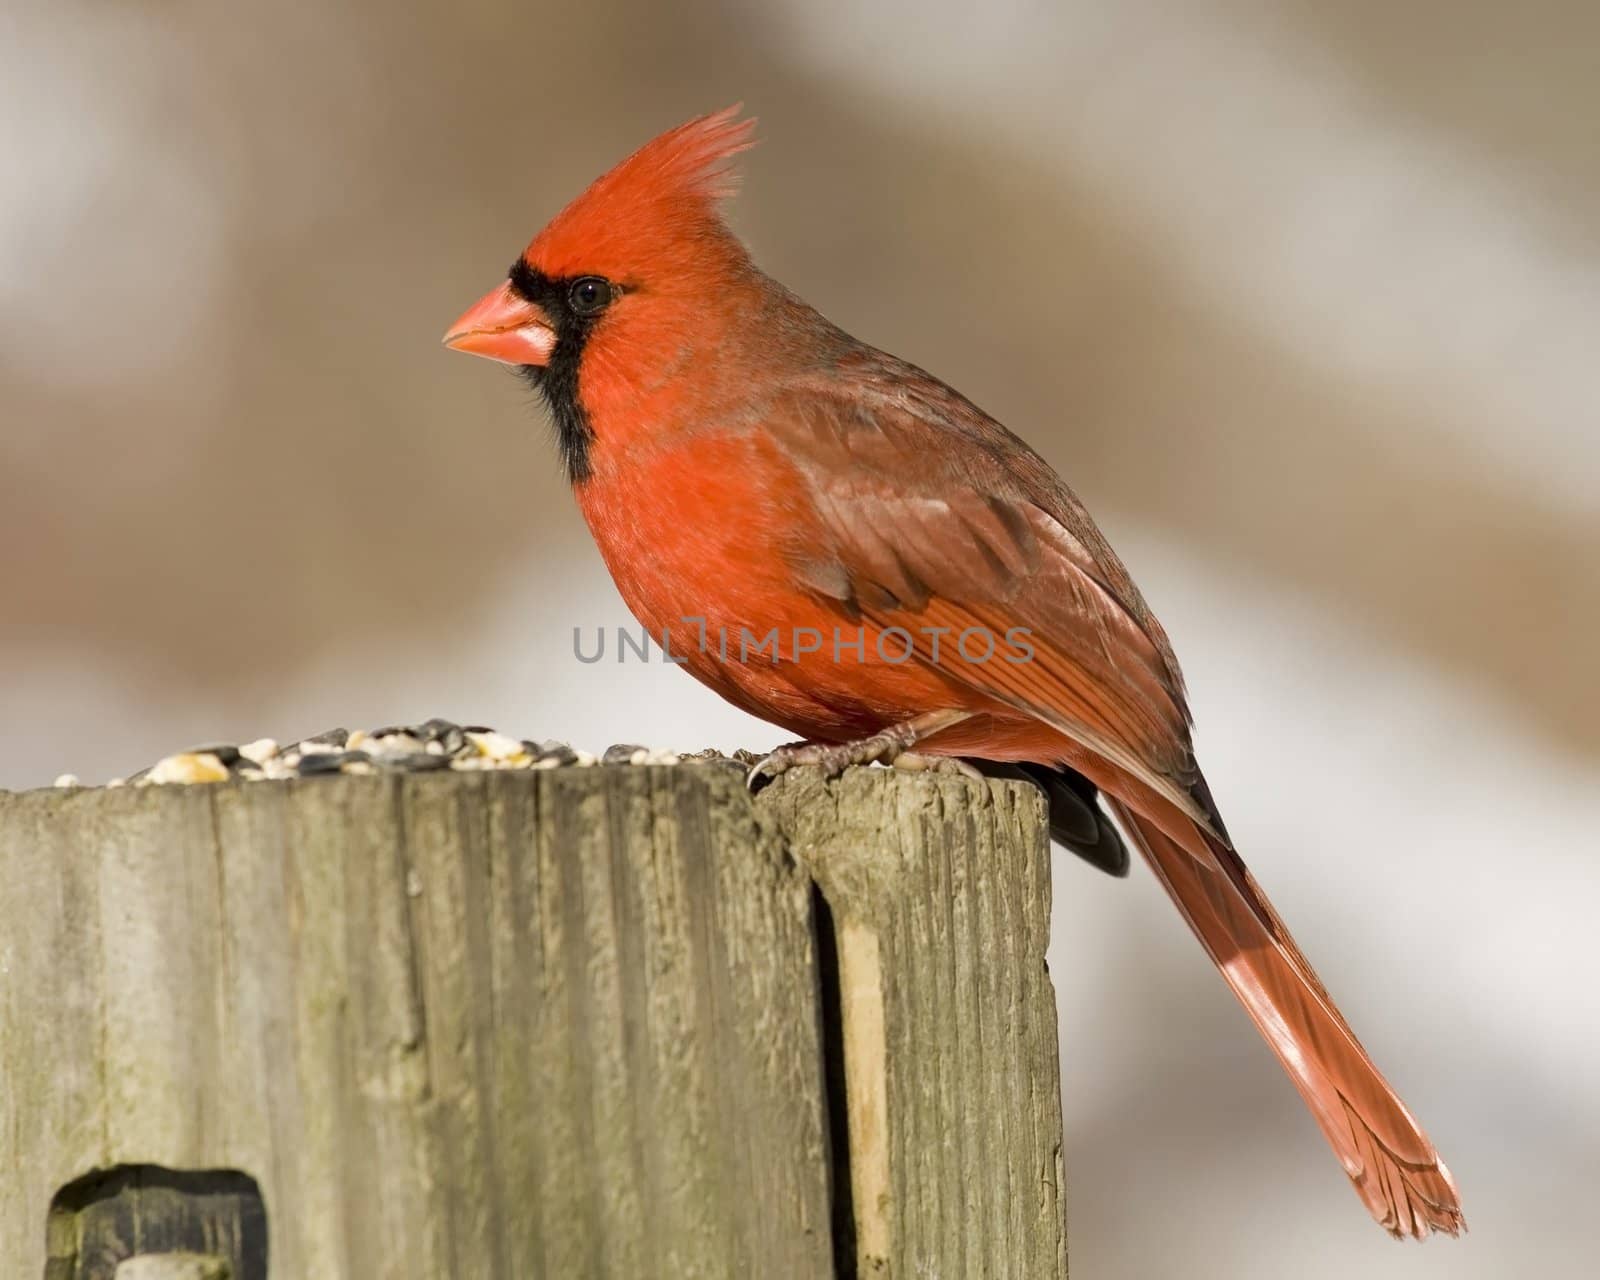 A male Cardinal perched on a wooden post.